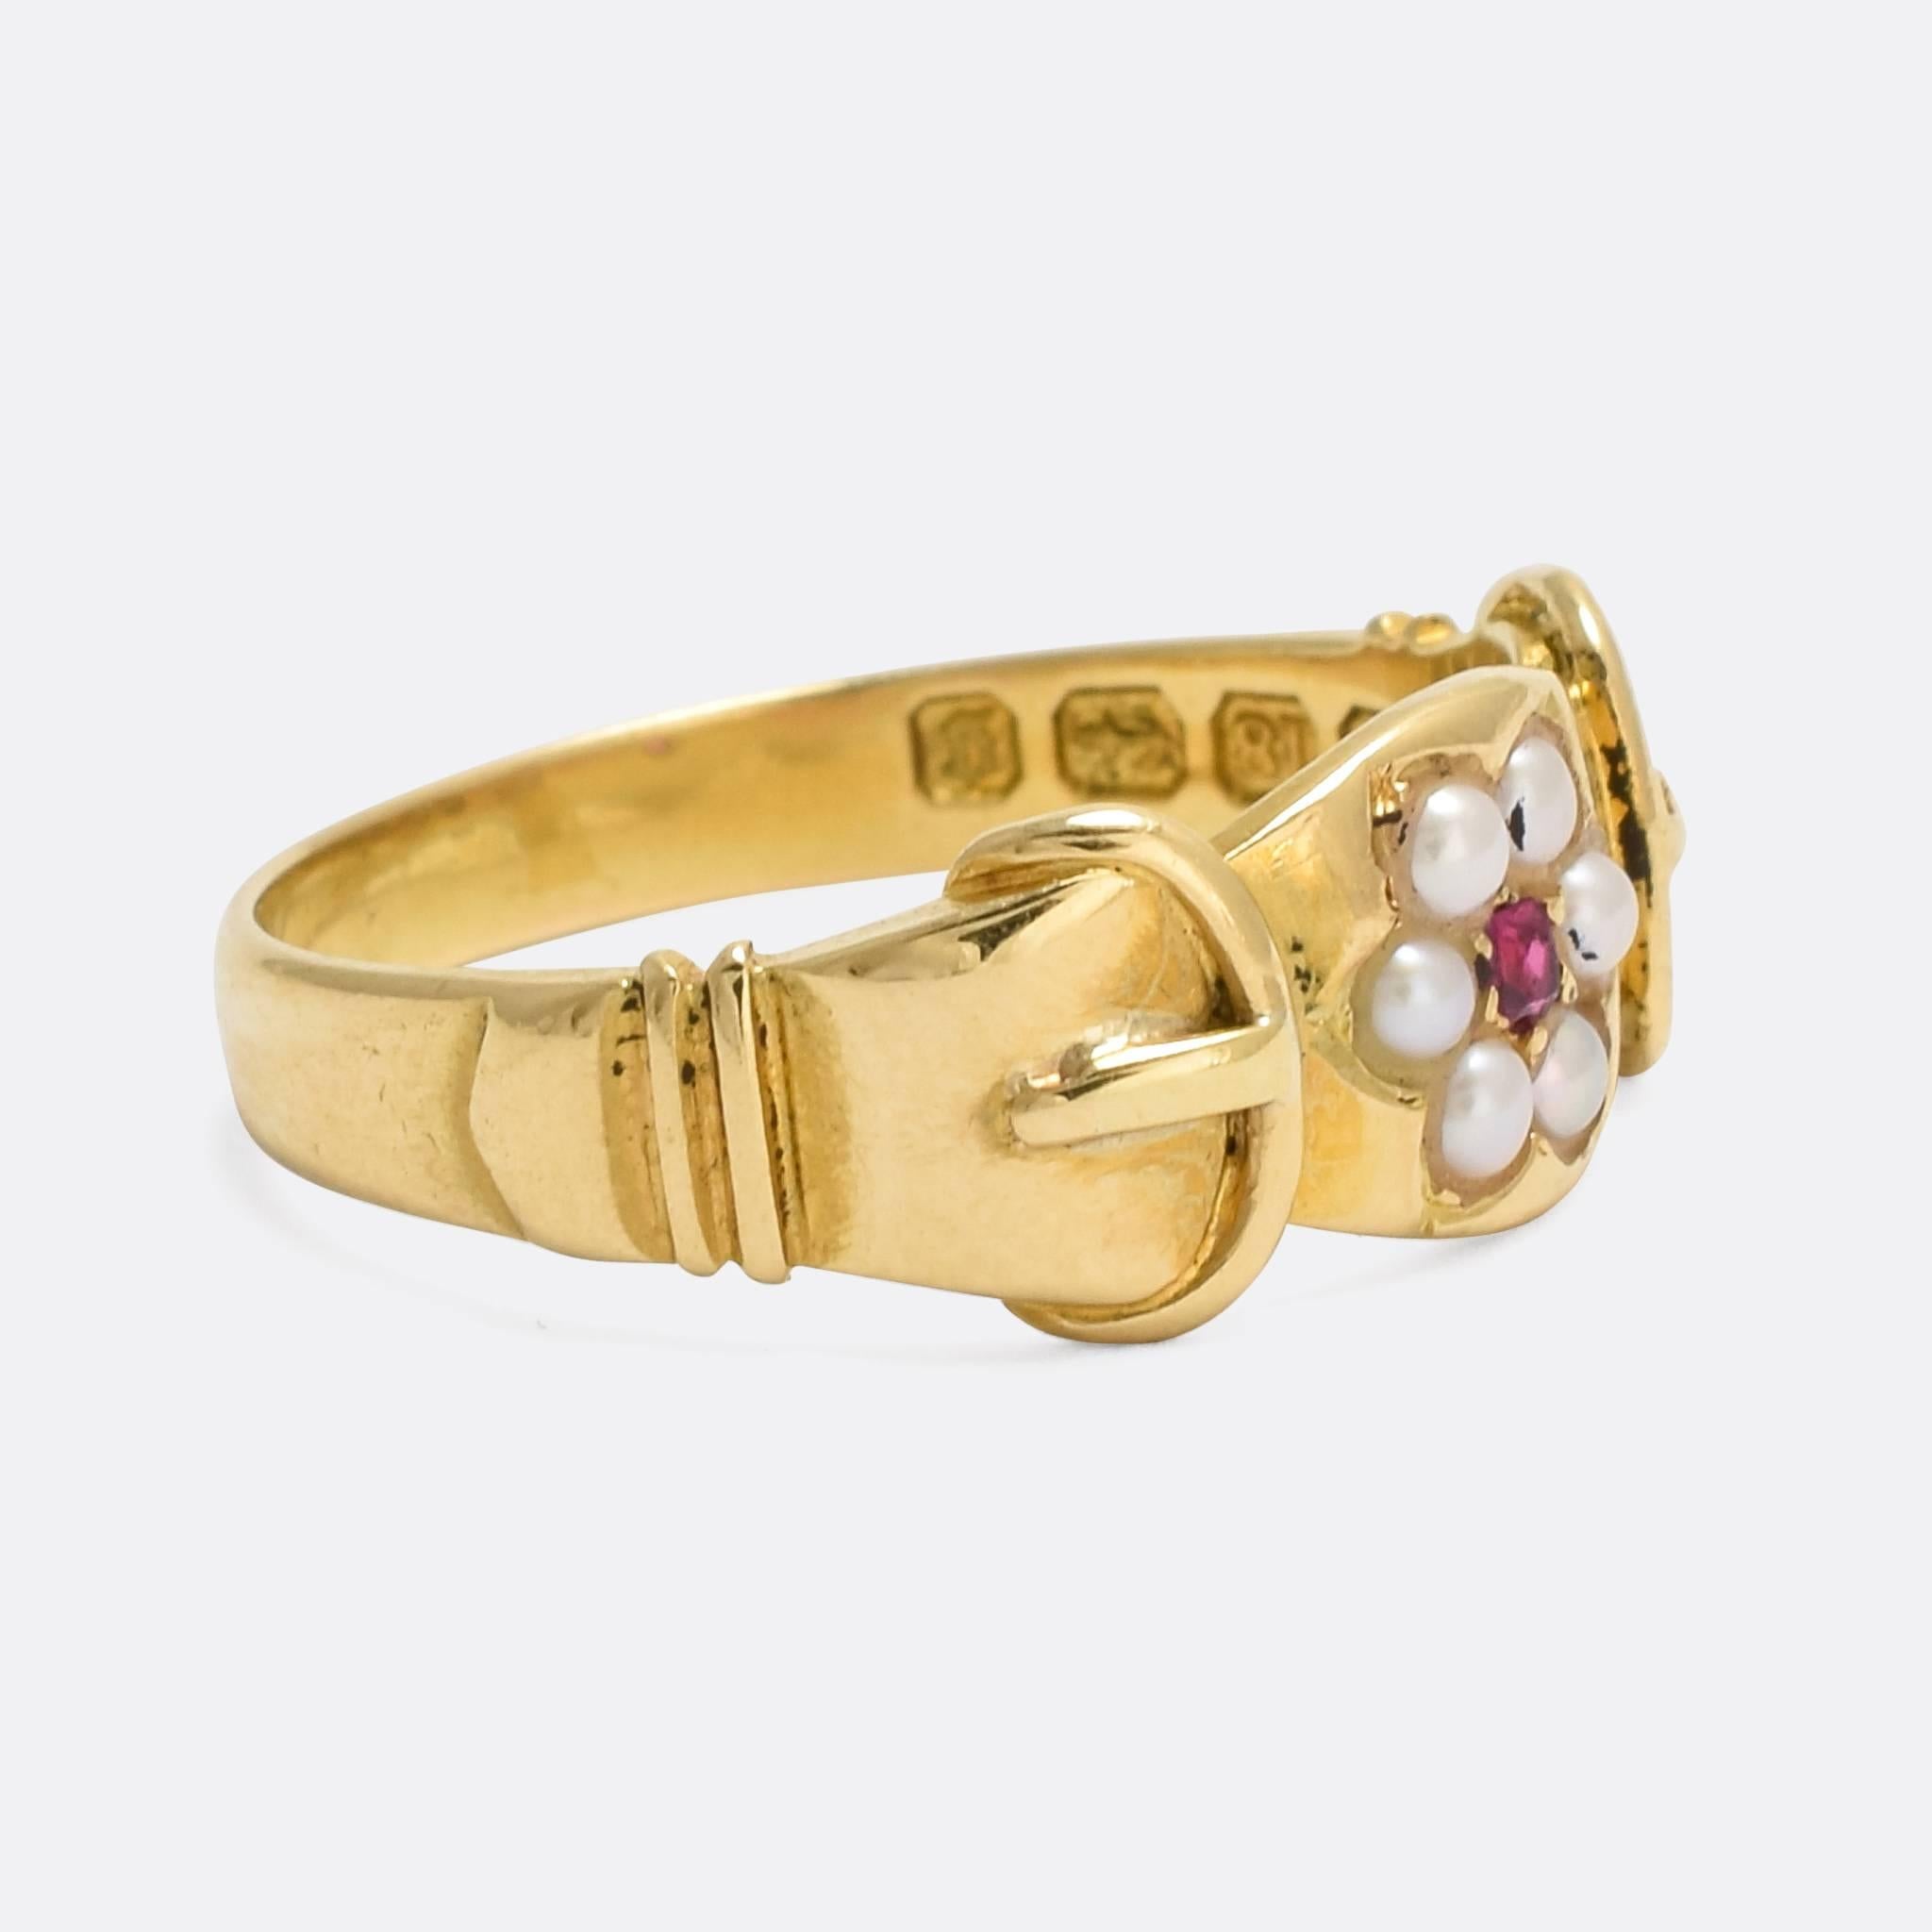 A pretty antique cluster ring set with a natural ruby surrounded by a halo of pearls. The shoulders are modelled as buckles, and the stones set into a flower motif. It's crafted from 18k gold throughout, with clear English hallmarks dating to the